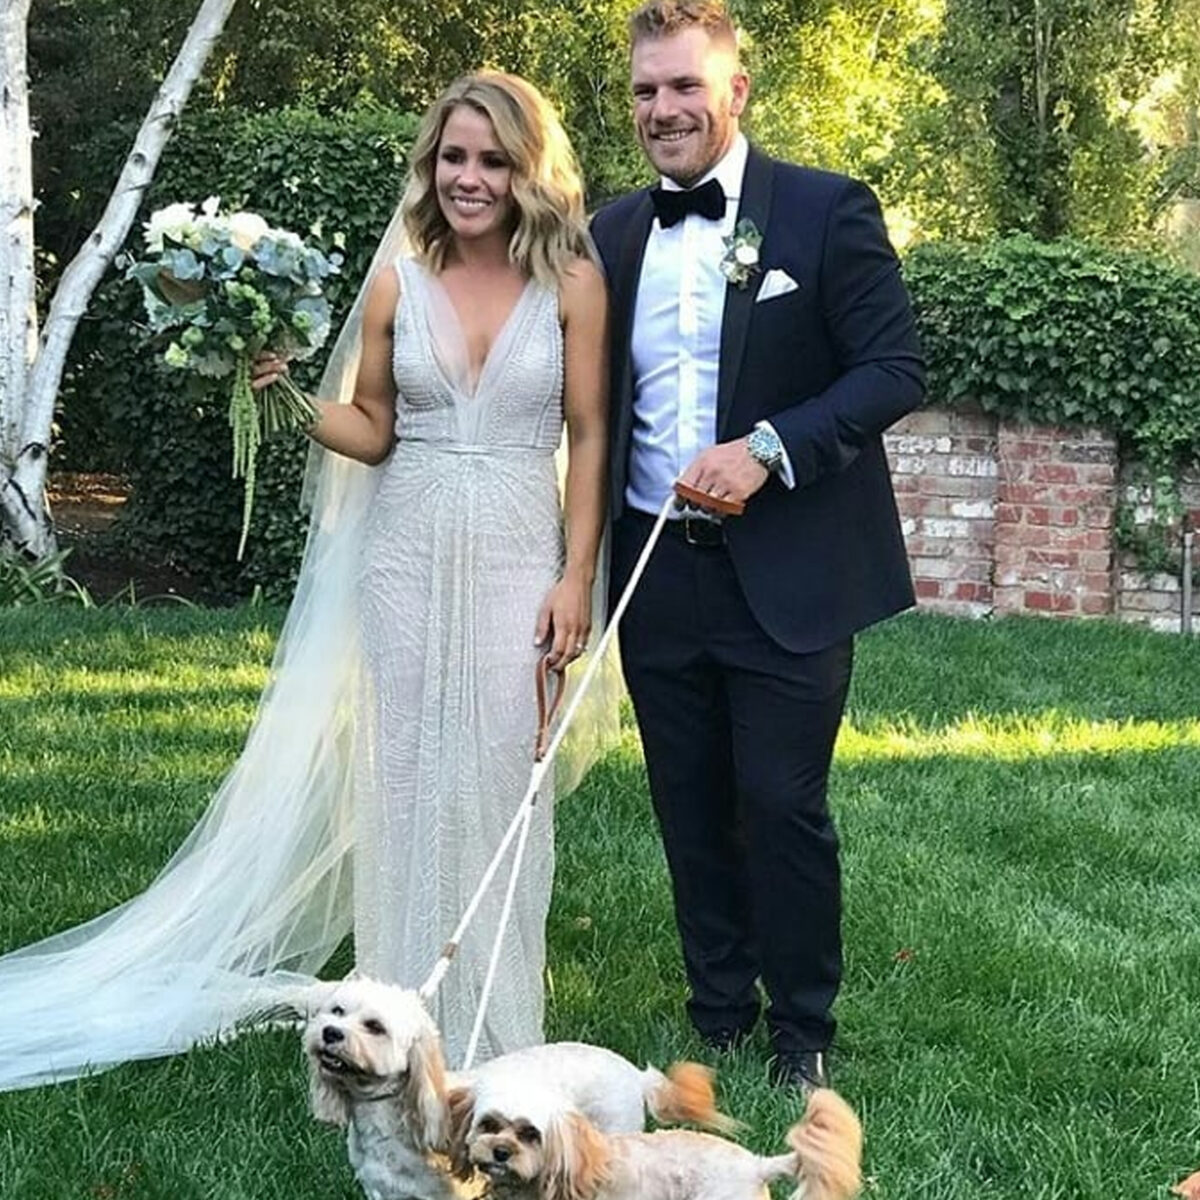 Aaron Finch's Wife Amy Finch Receives Sexual Assault And Violence Threats  After Husband Fails To Perform